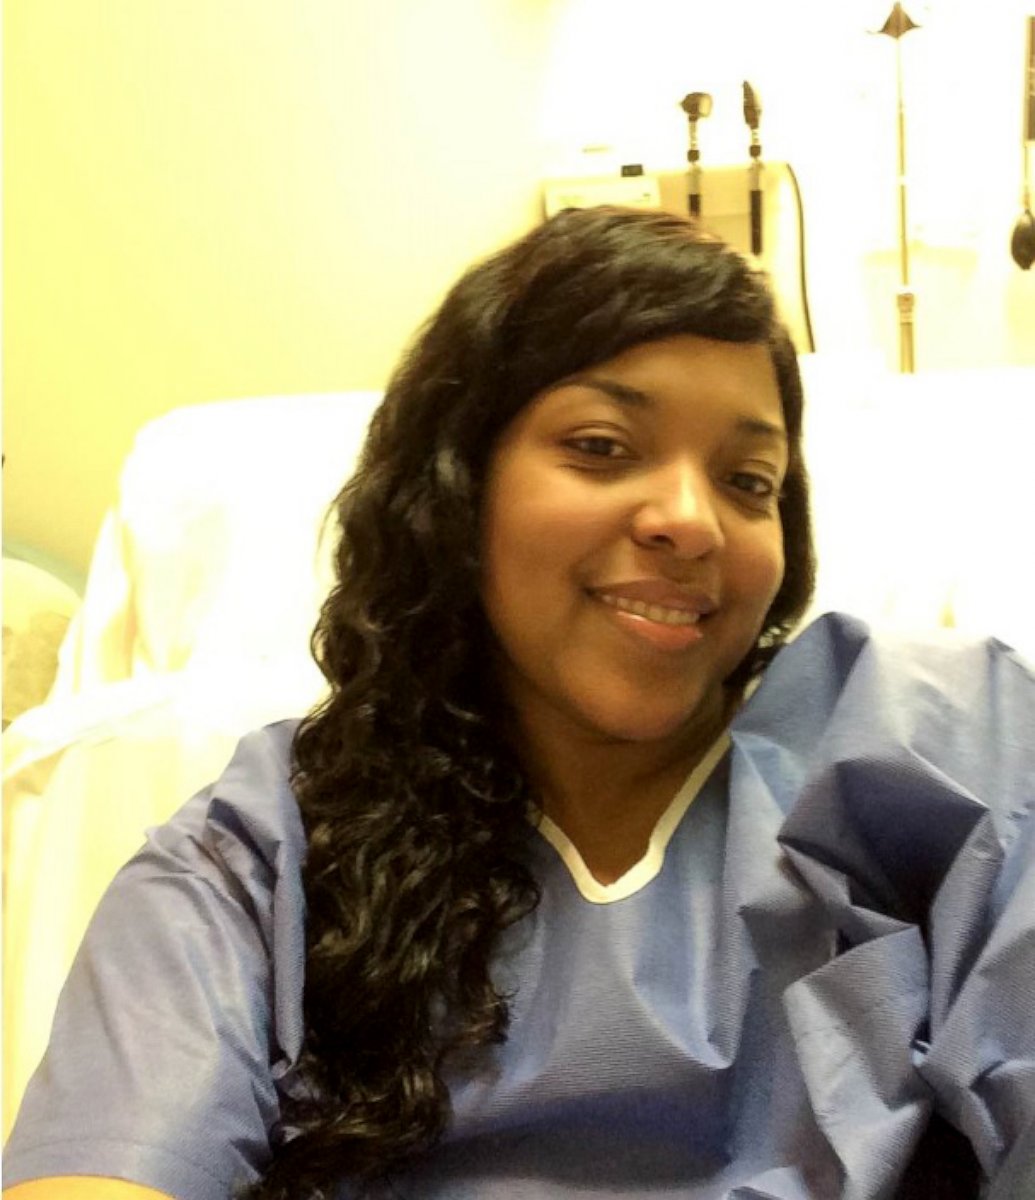 PHOTO: Amber Vinson, who contracted Ebola earlier this month, is seen in her room at Emory University Hospital in Atlanta.